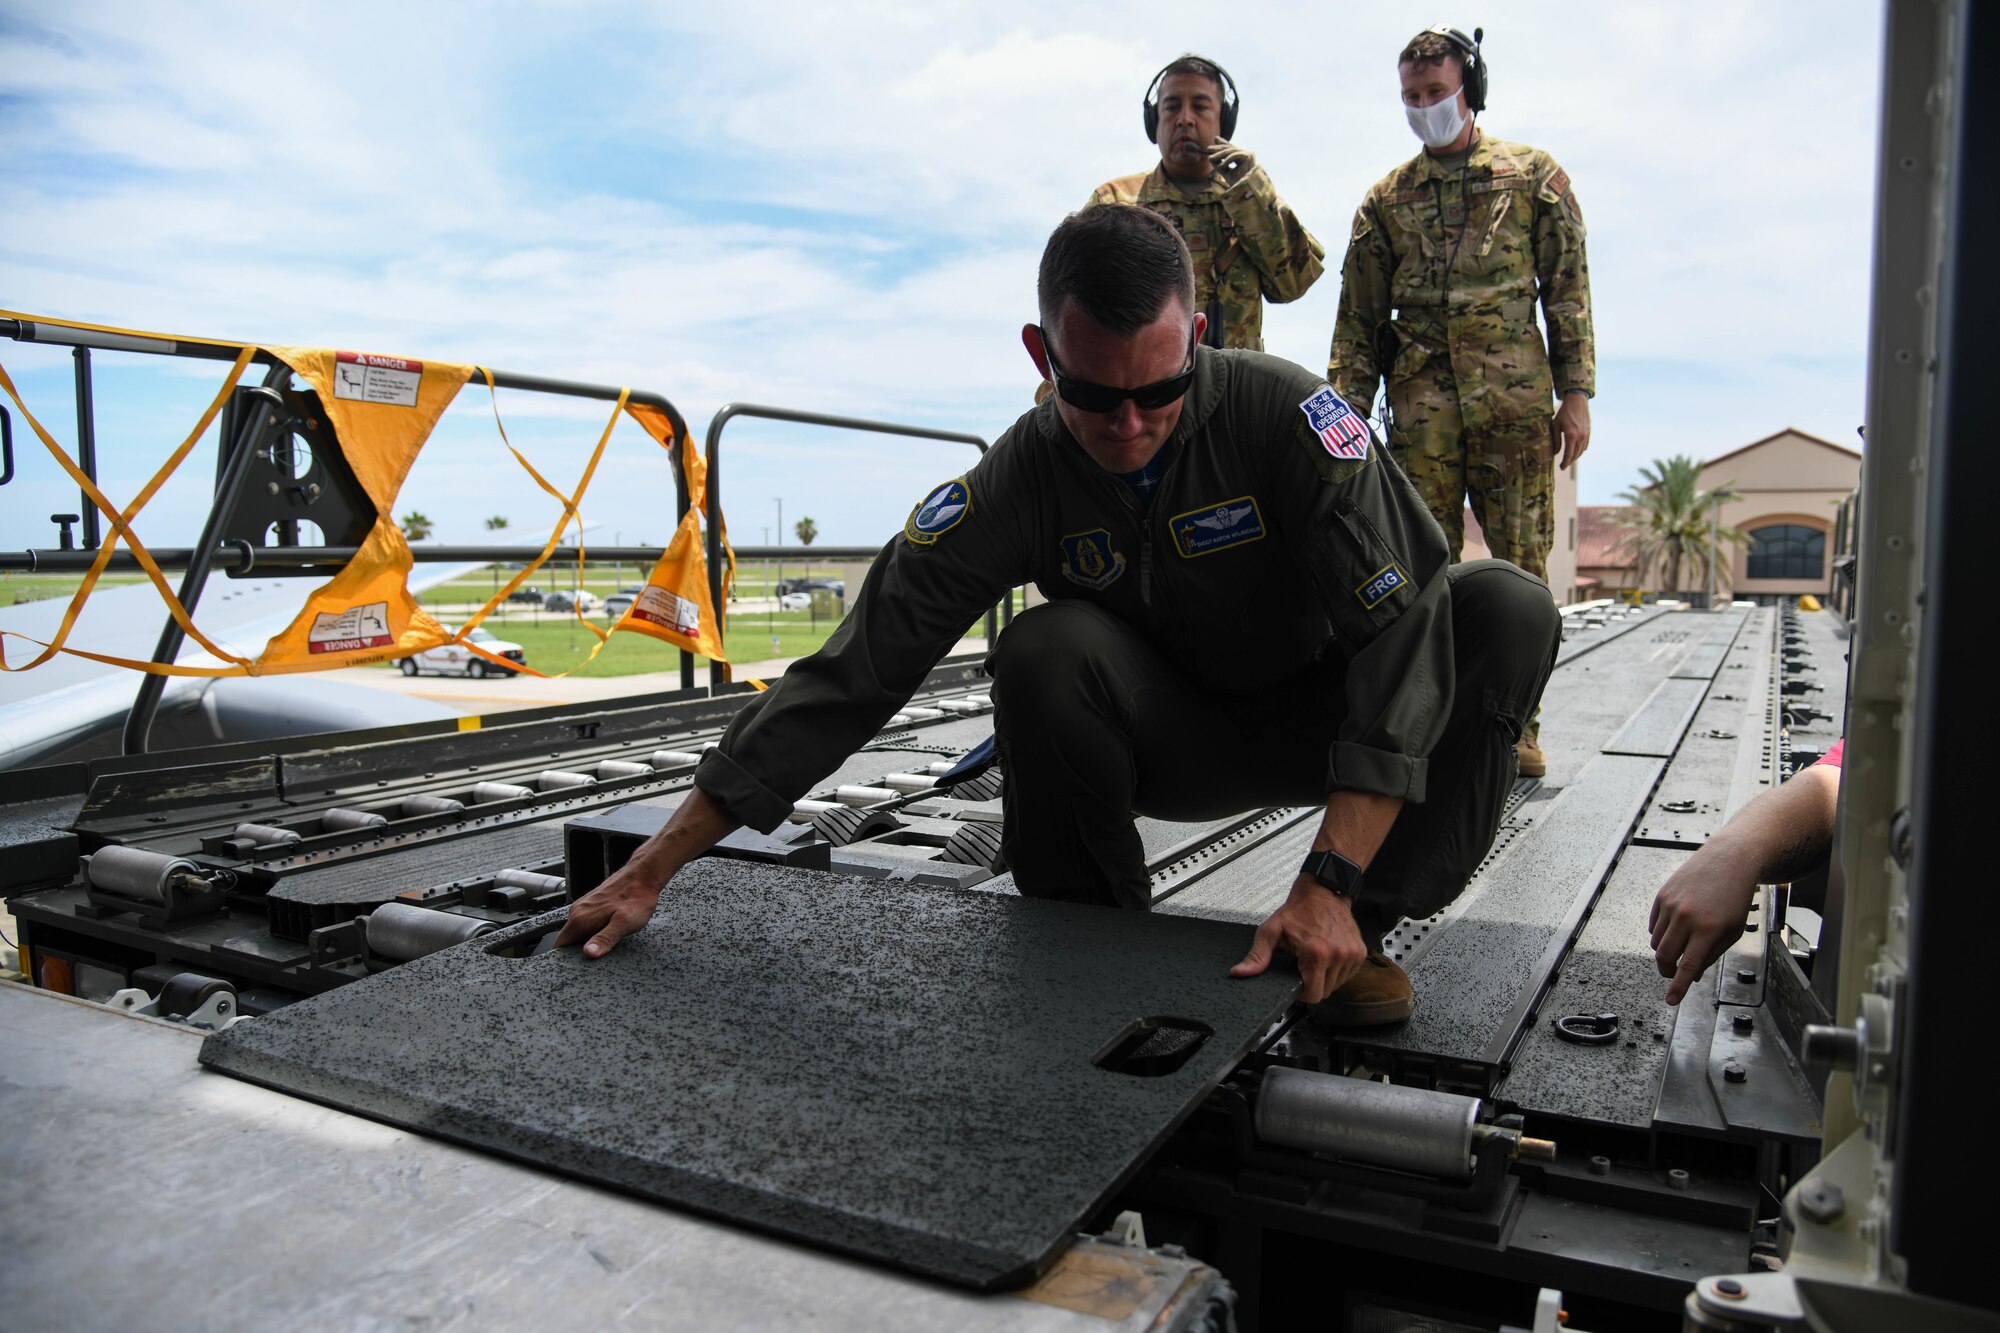 Senior Master Sgt. Aaron McLaughlin, 18th Air Refueling Squadron inflight refueler assigned to McConnell Air Force Base, Kansas places a cargo loader bridge plate prior to patient offload July 11, 2020, at Patrick Air Force Base, Florida. In preparation for the first operational aeromedical evacuation mission, three separate aeromedical evacuation’s were simulated to help determine the usability of medical equipment, capacity of patients and proper aircraft staging. (U.S. Air Force photo by Airman 1st Class Nilsa Garcia)